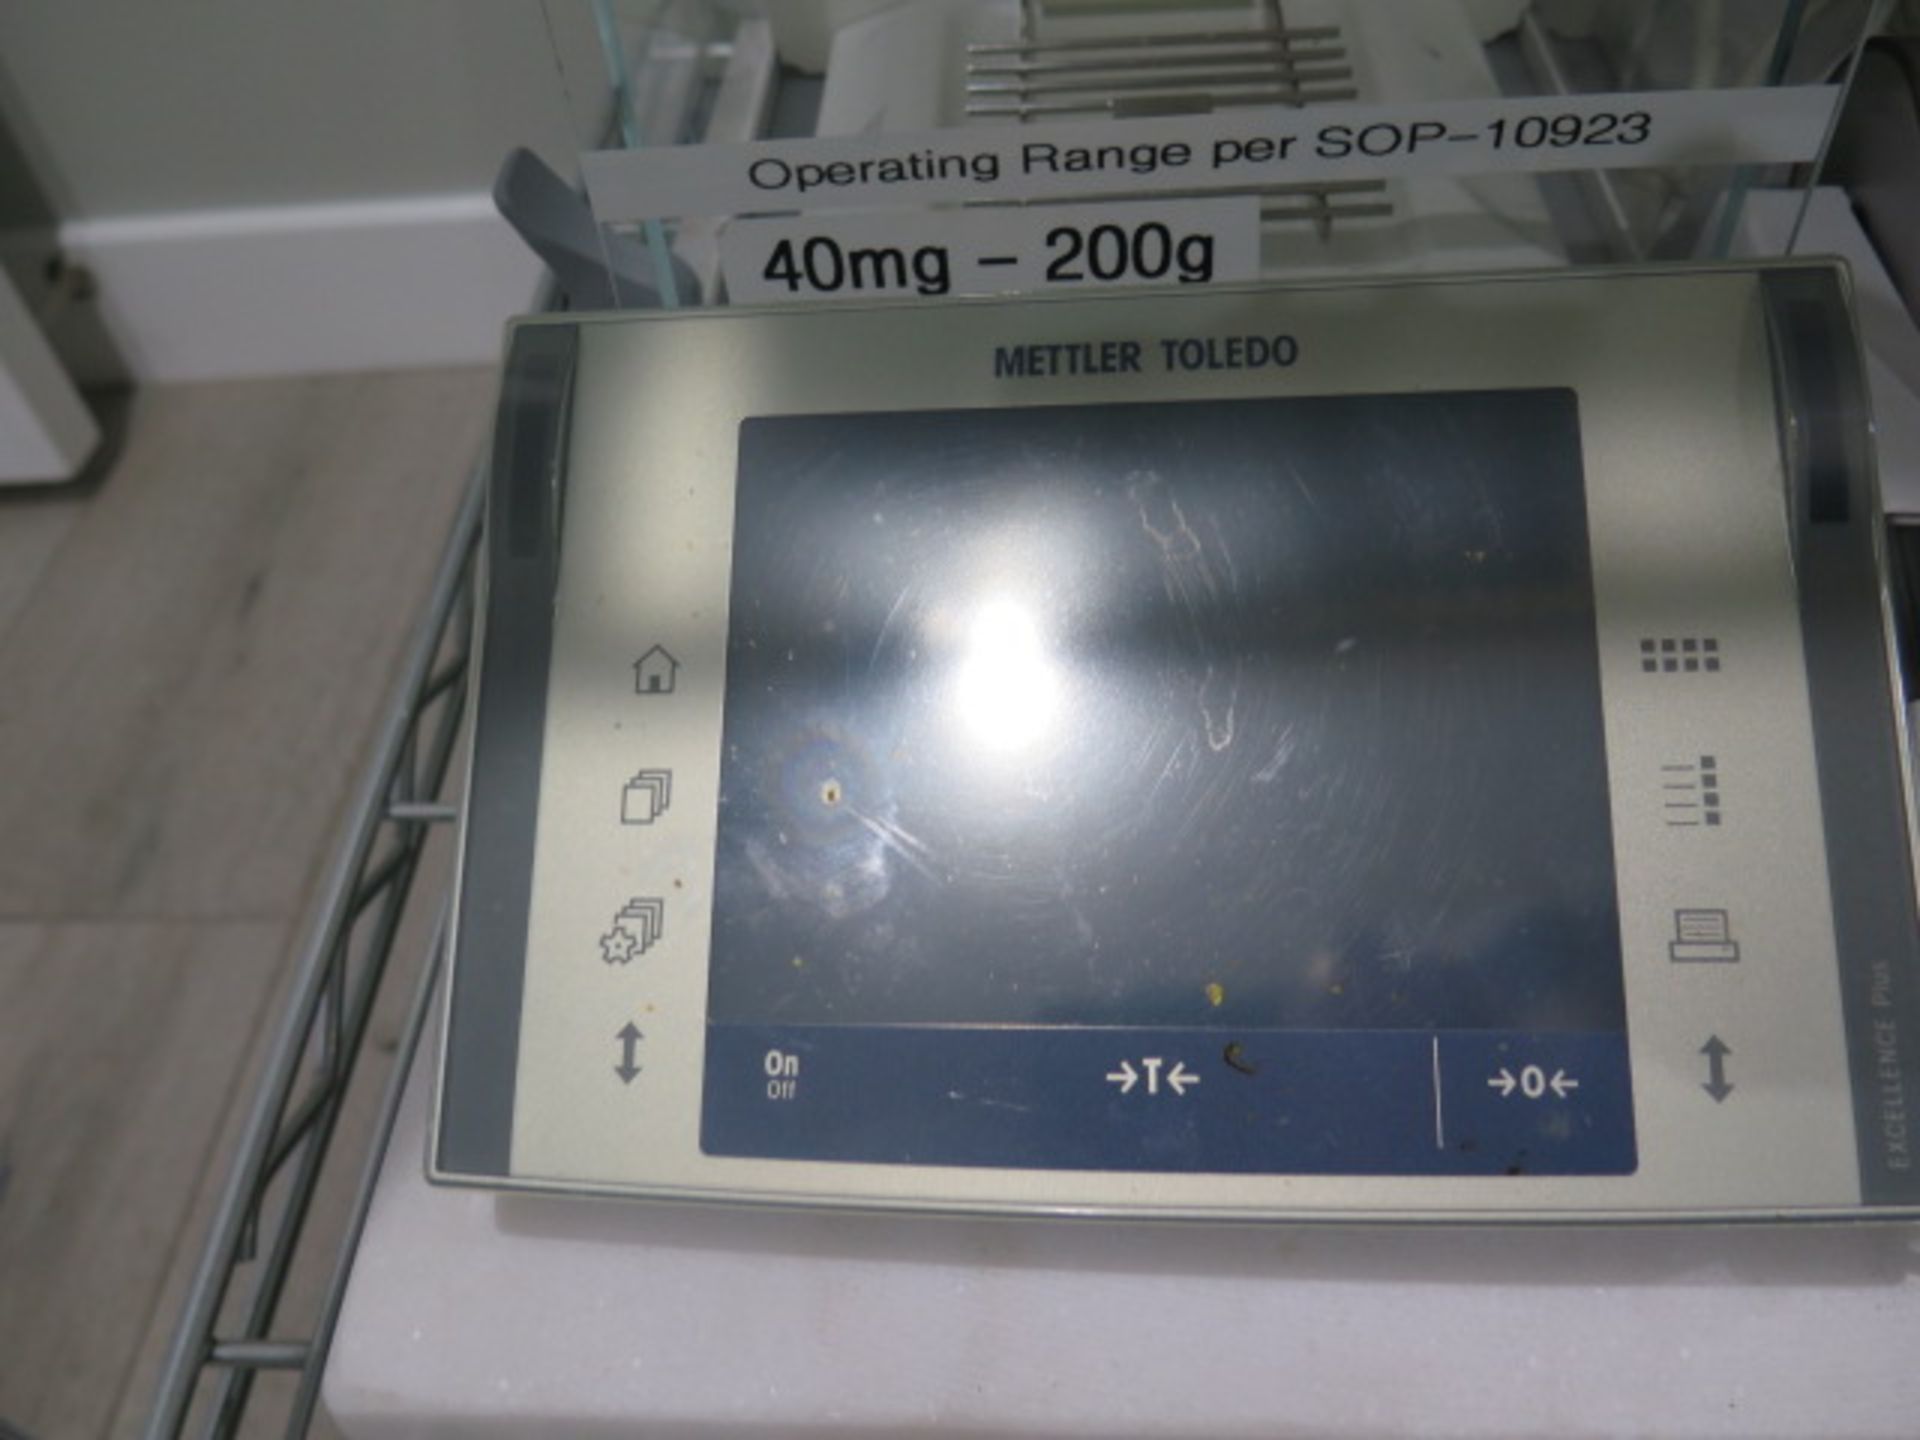 Mettler Toledo XP205 DeltaRange Analytical Balance Scale 0.01mg-220g w/ Static Detect, SOLD AS IS - Image 7 of 9